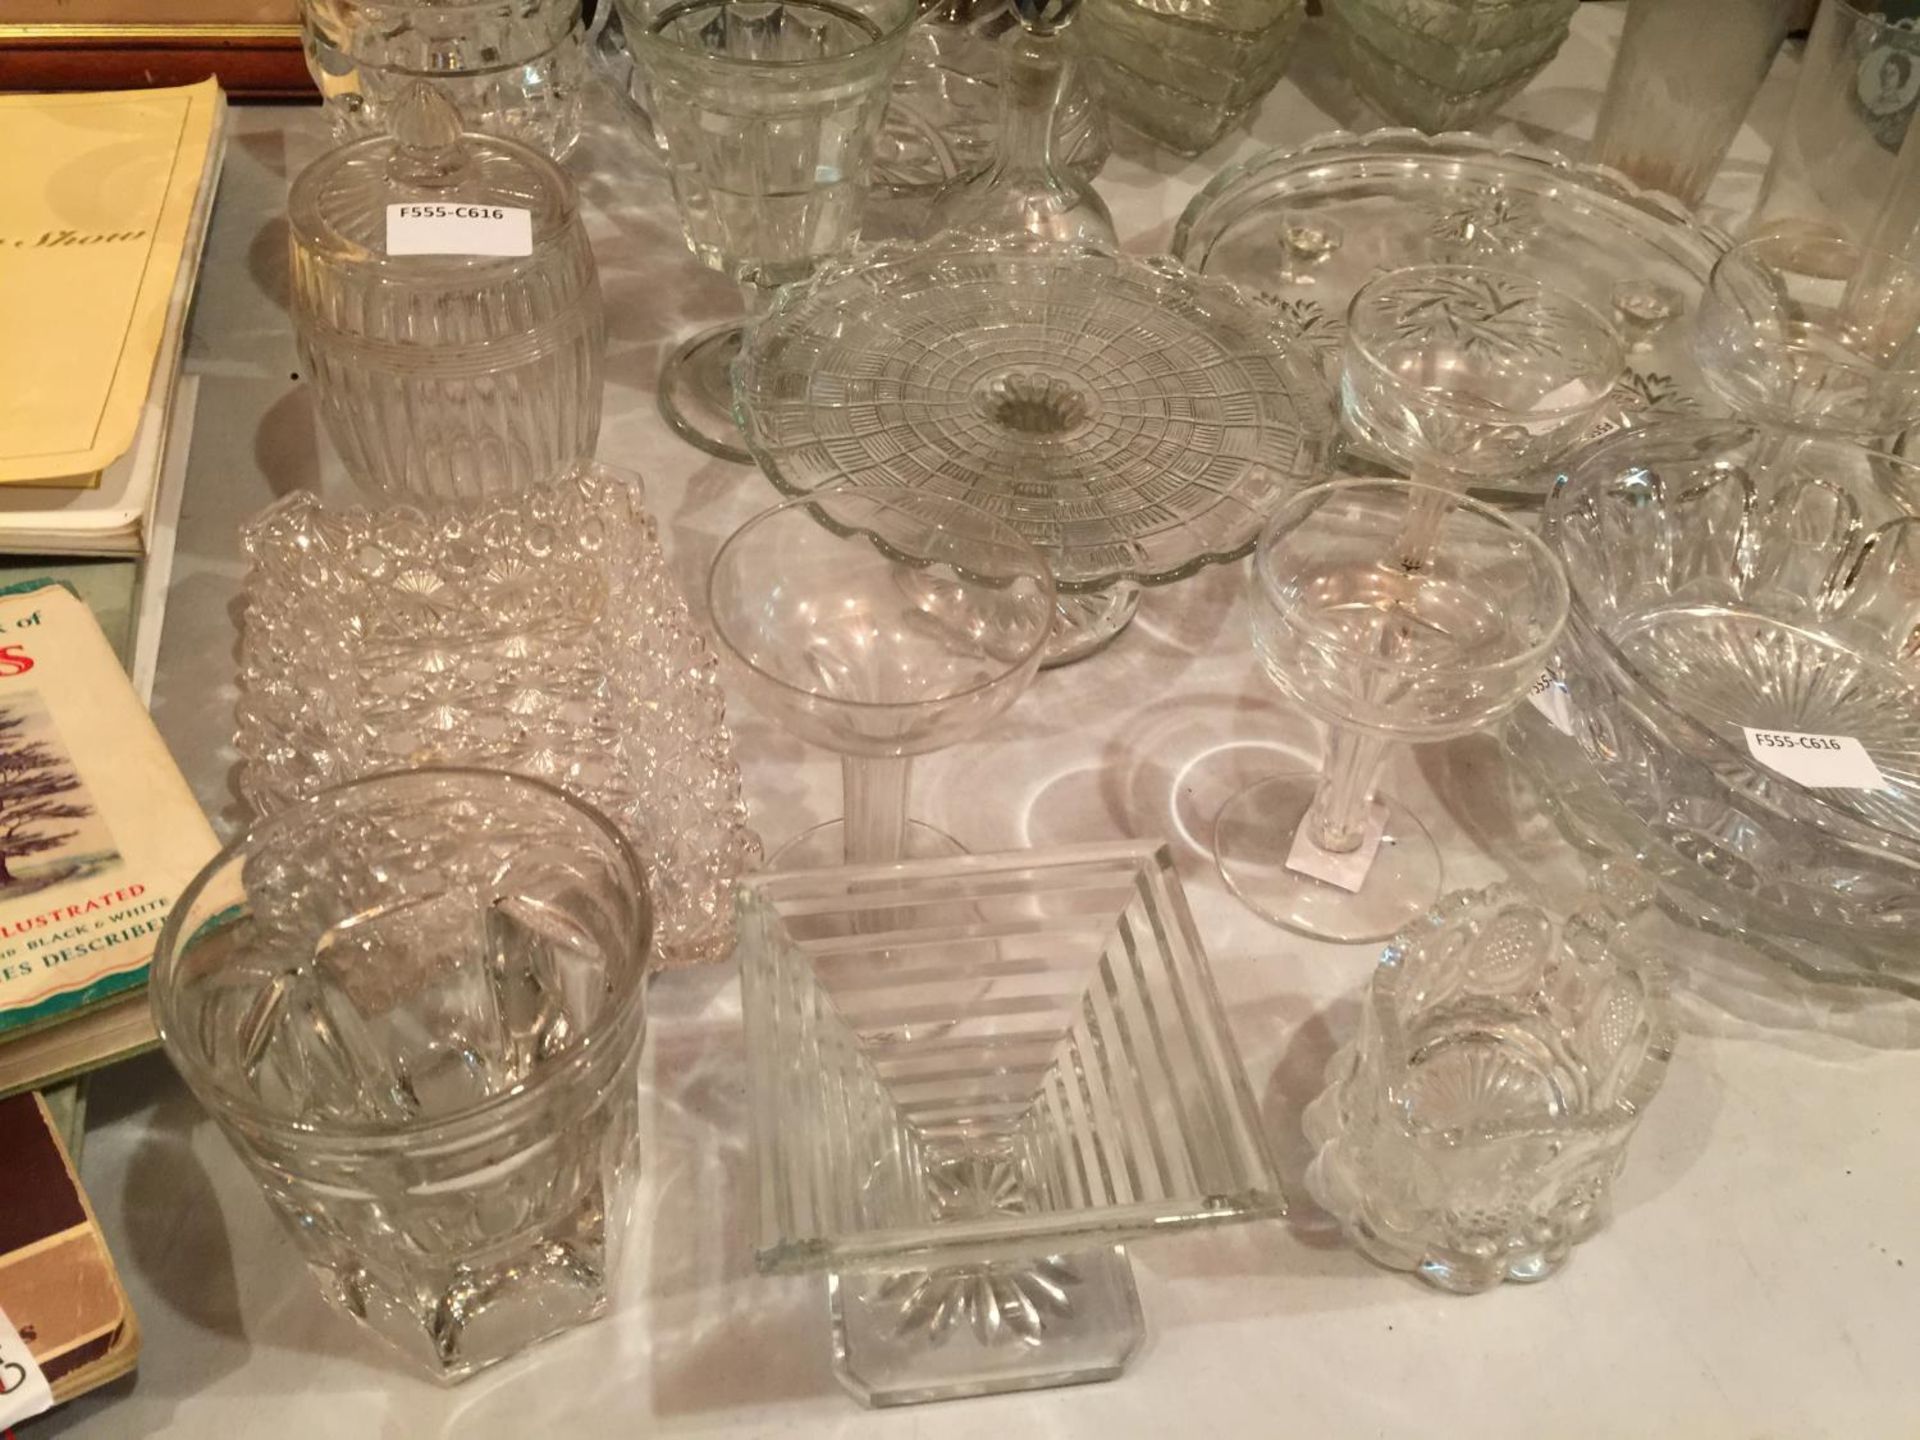 A LARGE AMOUNT OF CLEAR GLASSWARE TO INCLUDE HEART SHAPED DISHES, COMMEMORATIVE TUMBLERS, CAKE - Image 3 of 4